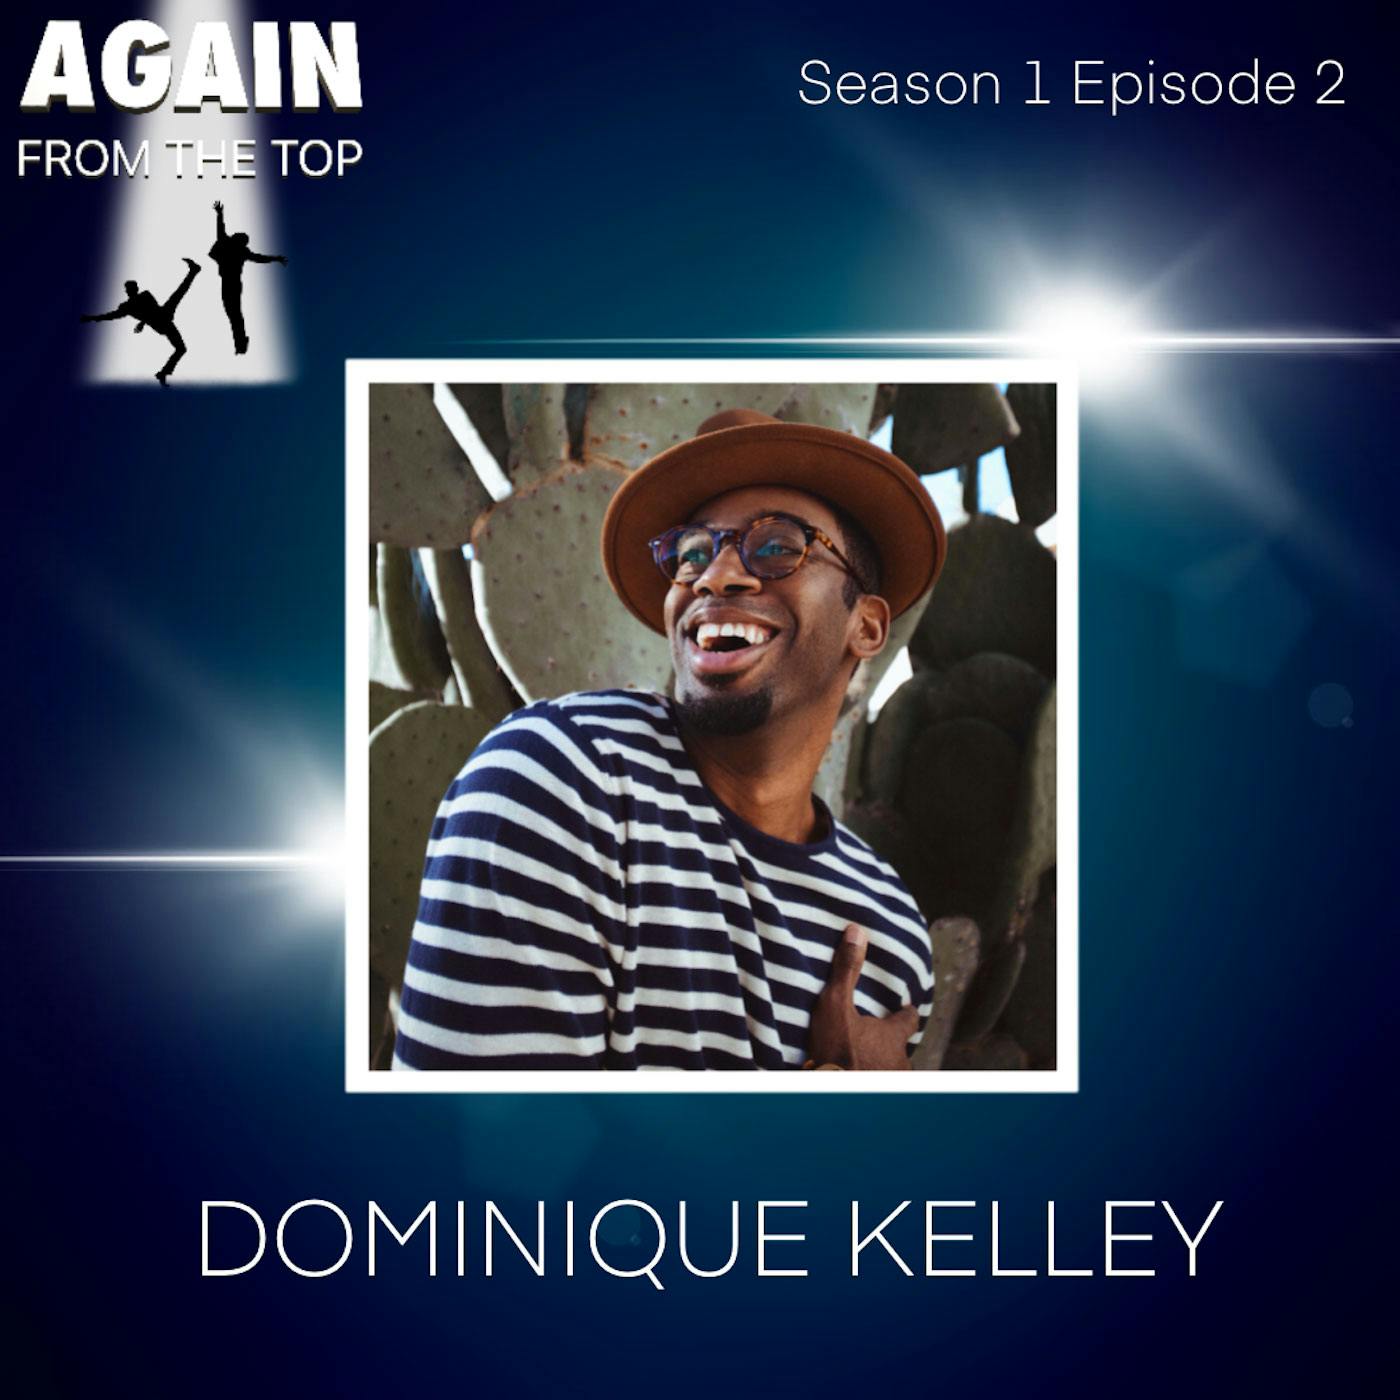 S1/Ep2: DOMINIQUE KELLEY’S WING TIPS AND WINGSPAN